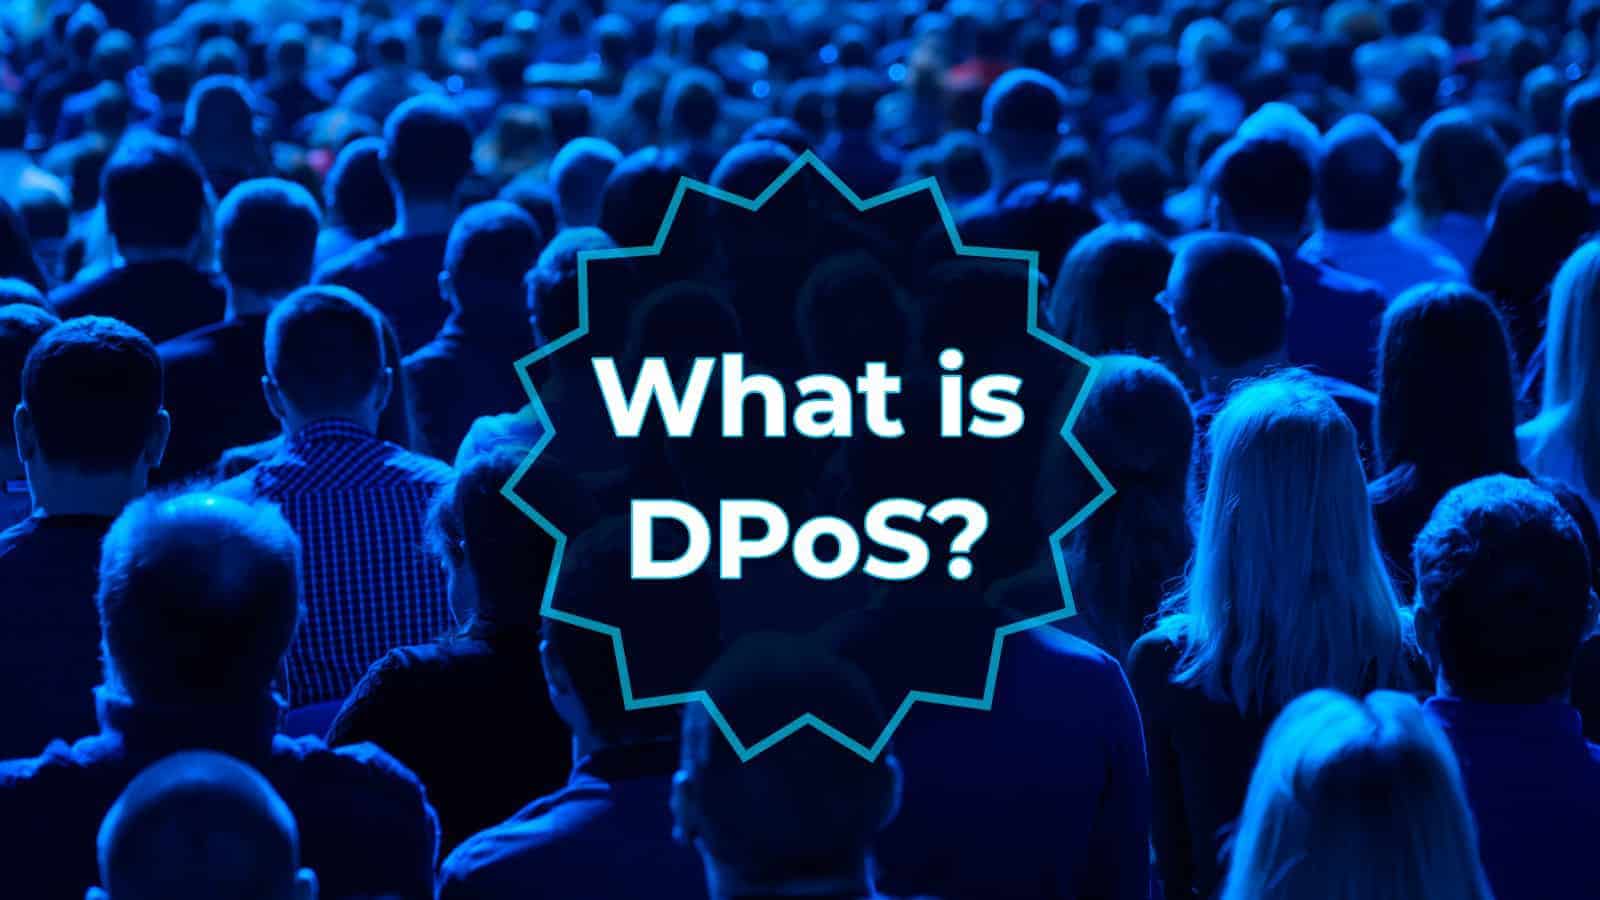 What is Delegated Proof of Stake (DPoS)?